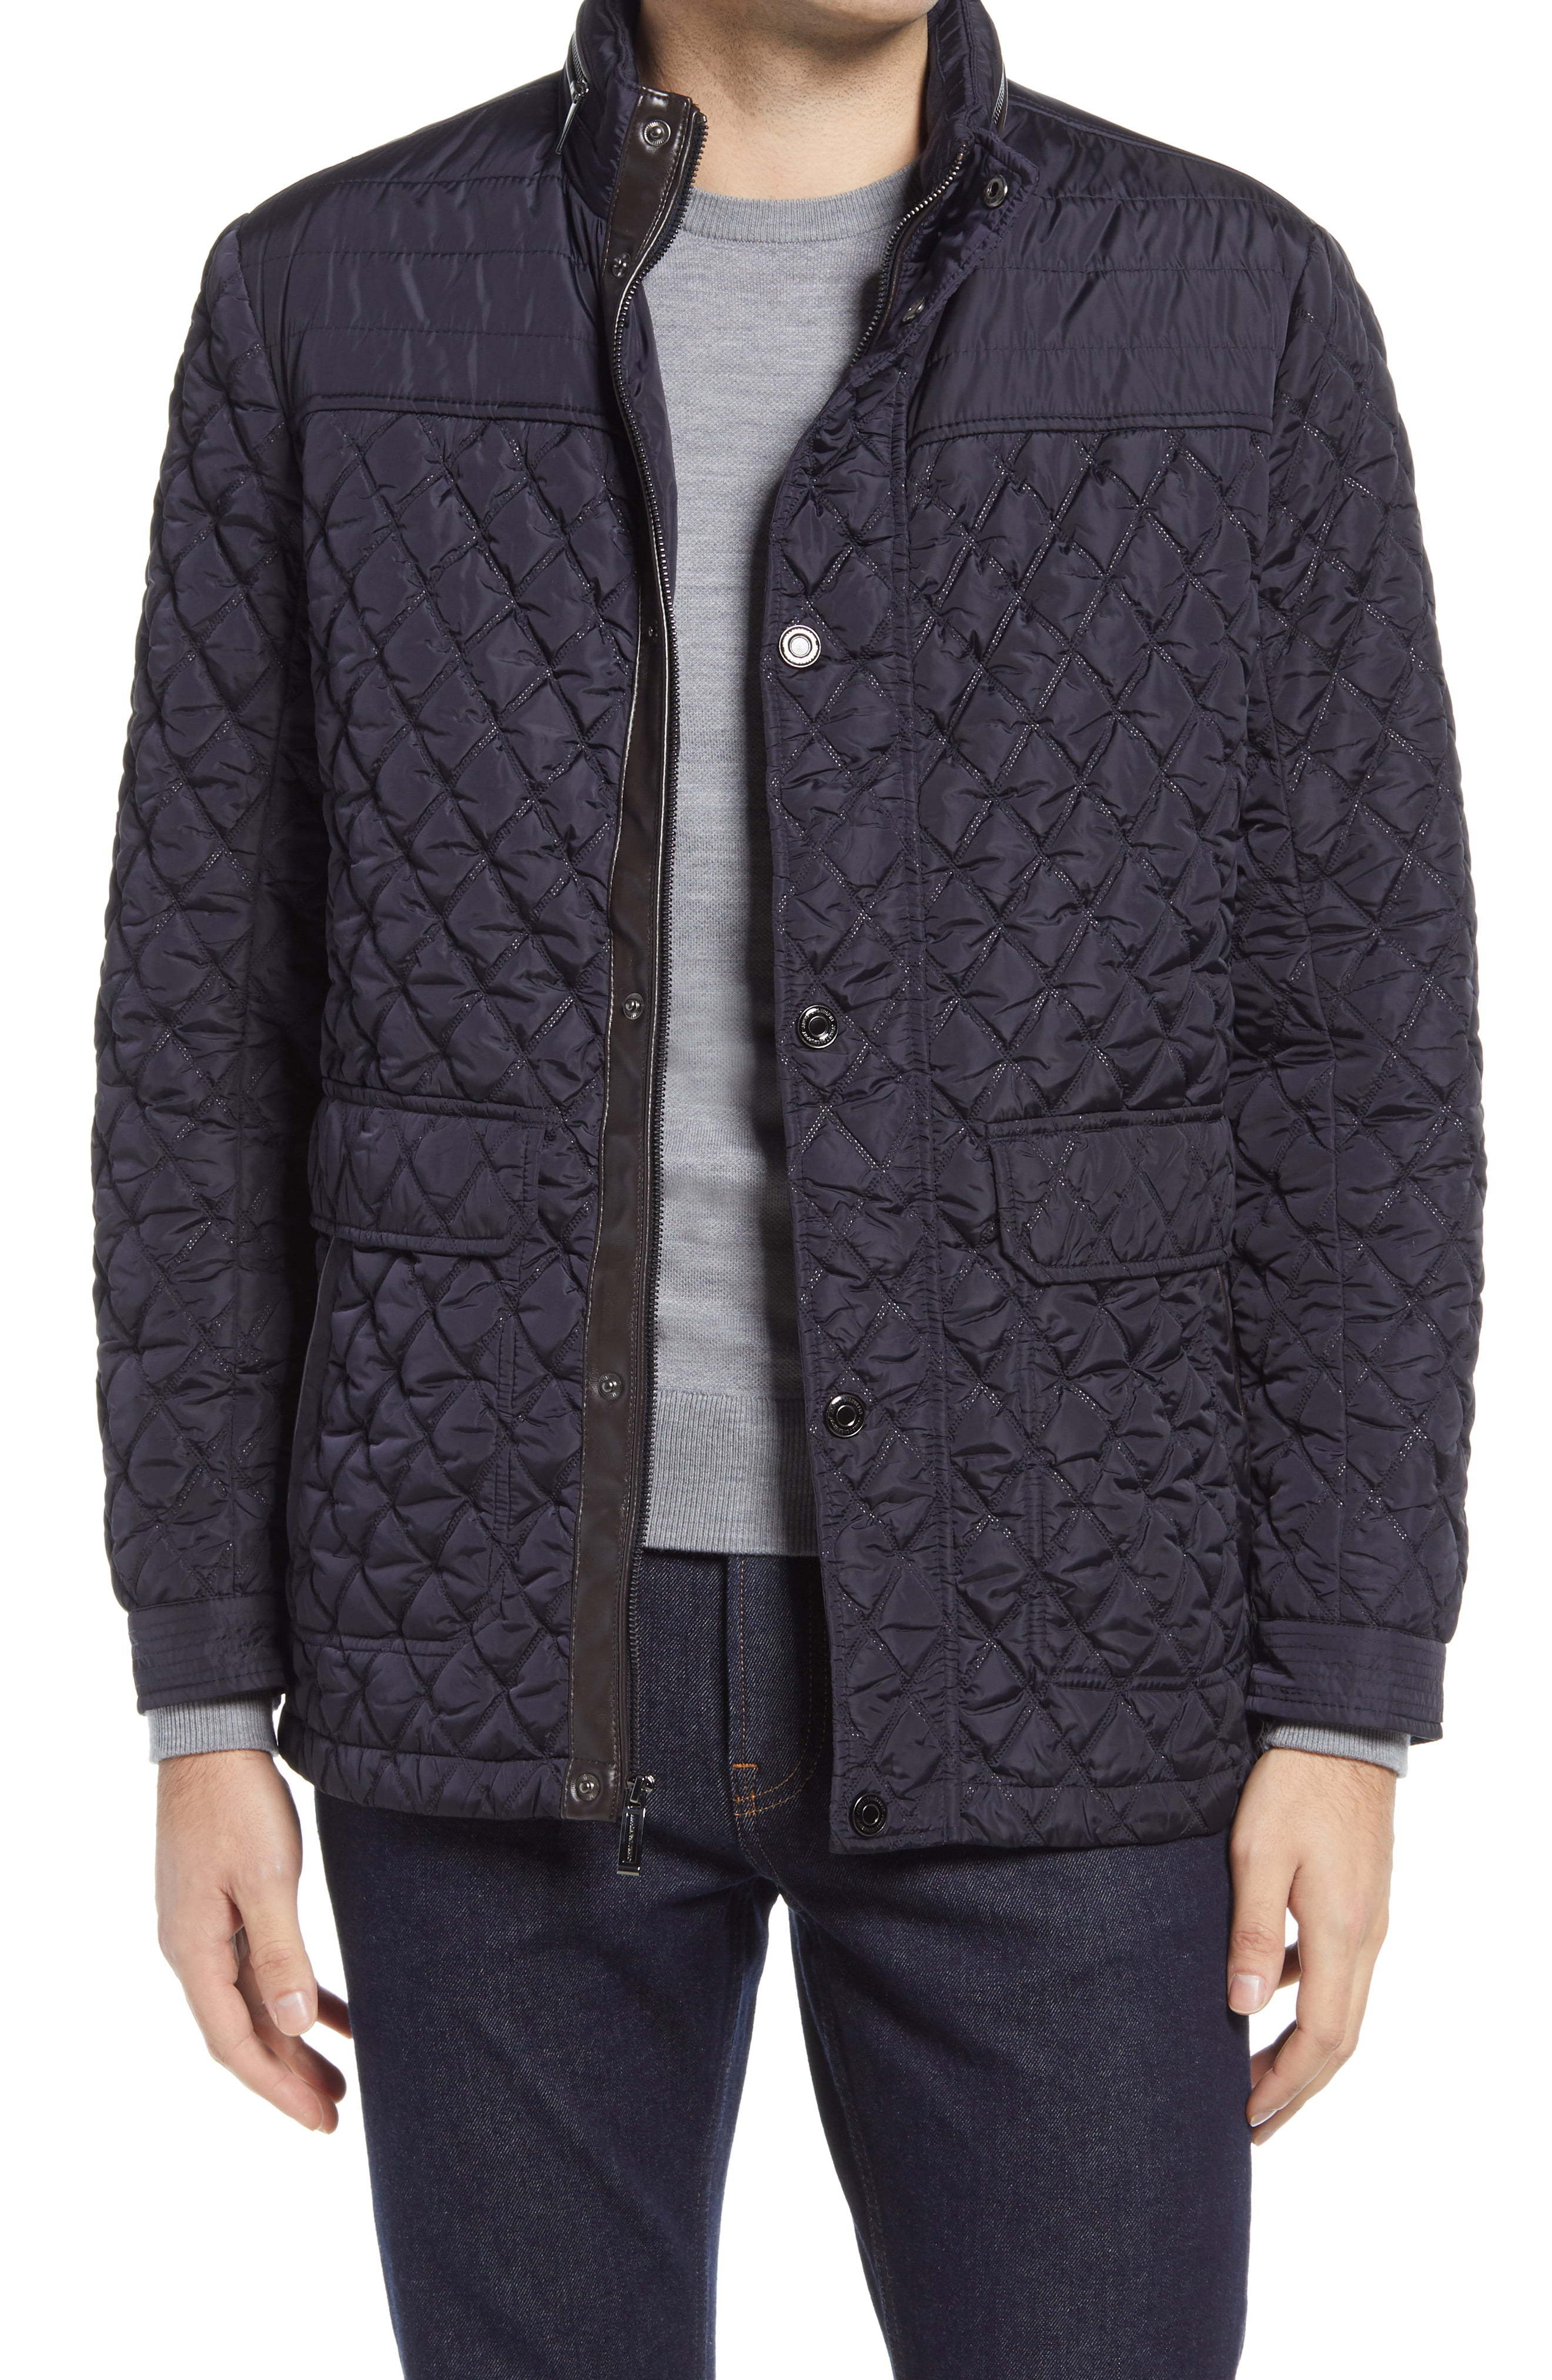 Johnston & Murphy Quilted Hooded Water Resistant Jacket, $179 ...